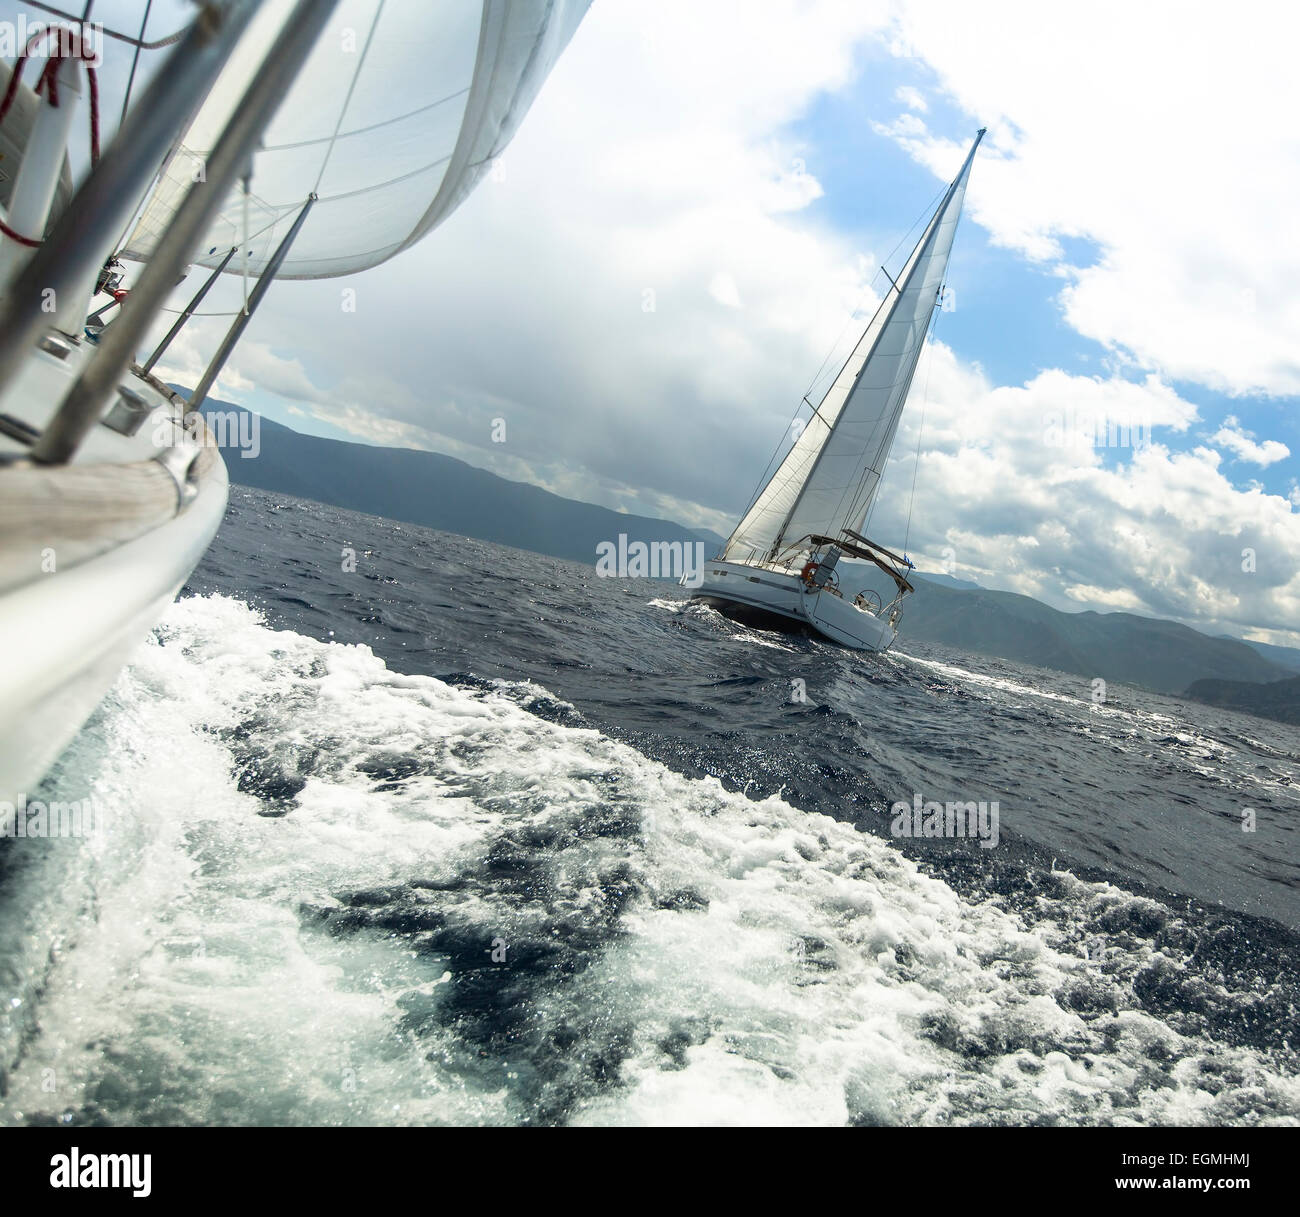 Yacht race in stormy weather. Sailing regatta. Stock Photo